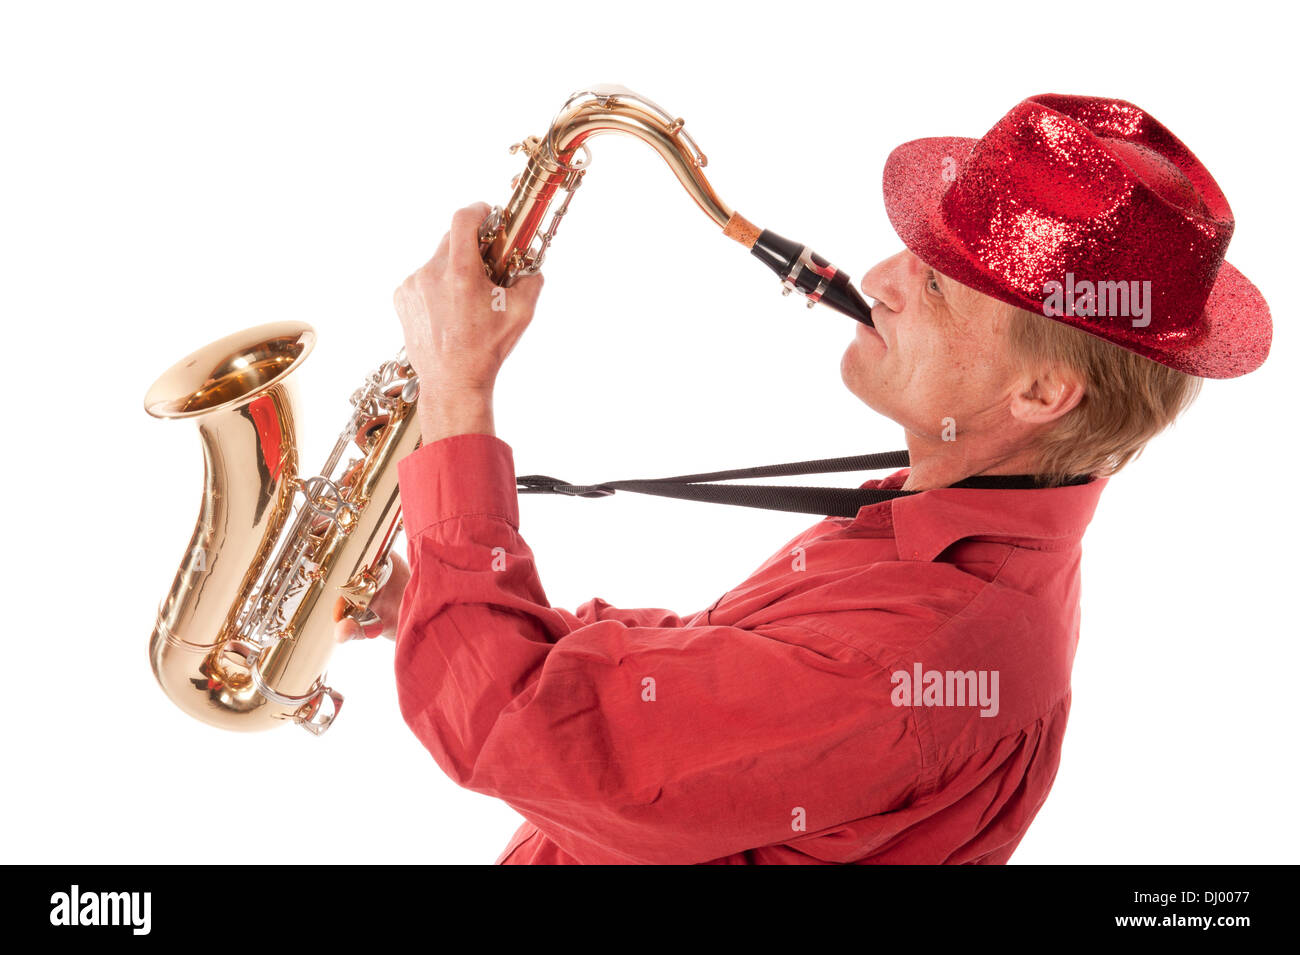 Male entertainer playing a brass tenor saxophone with silver valves and pearl buttons leaning backwards Stock Photo